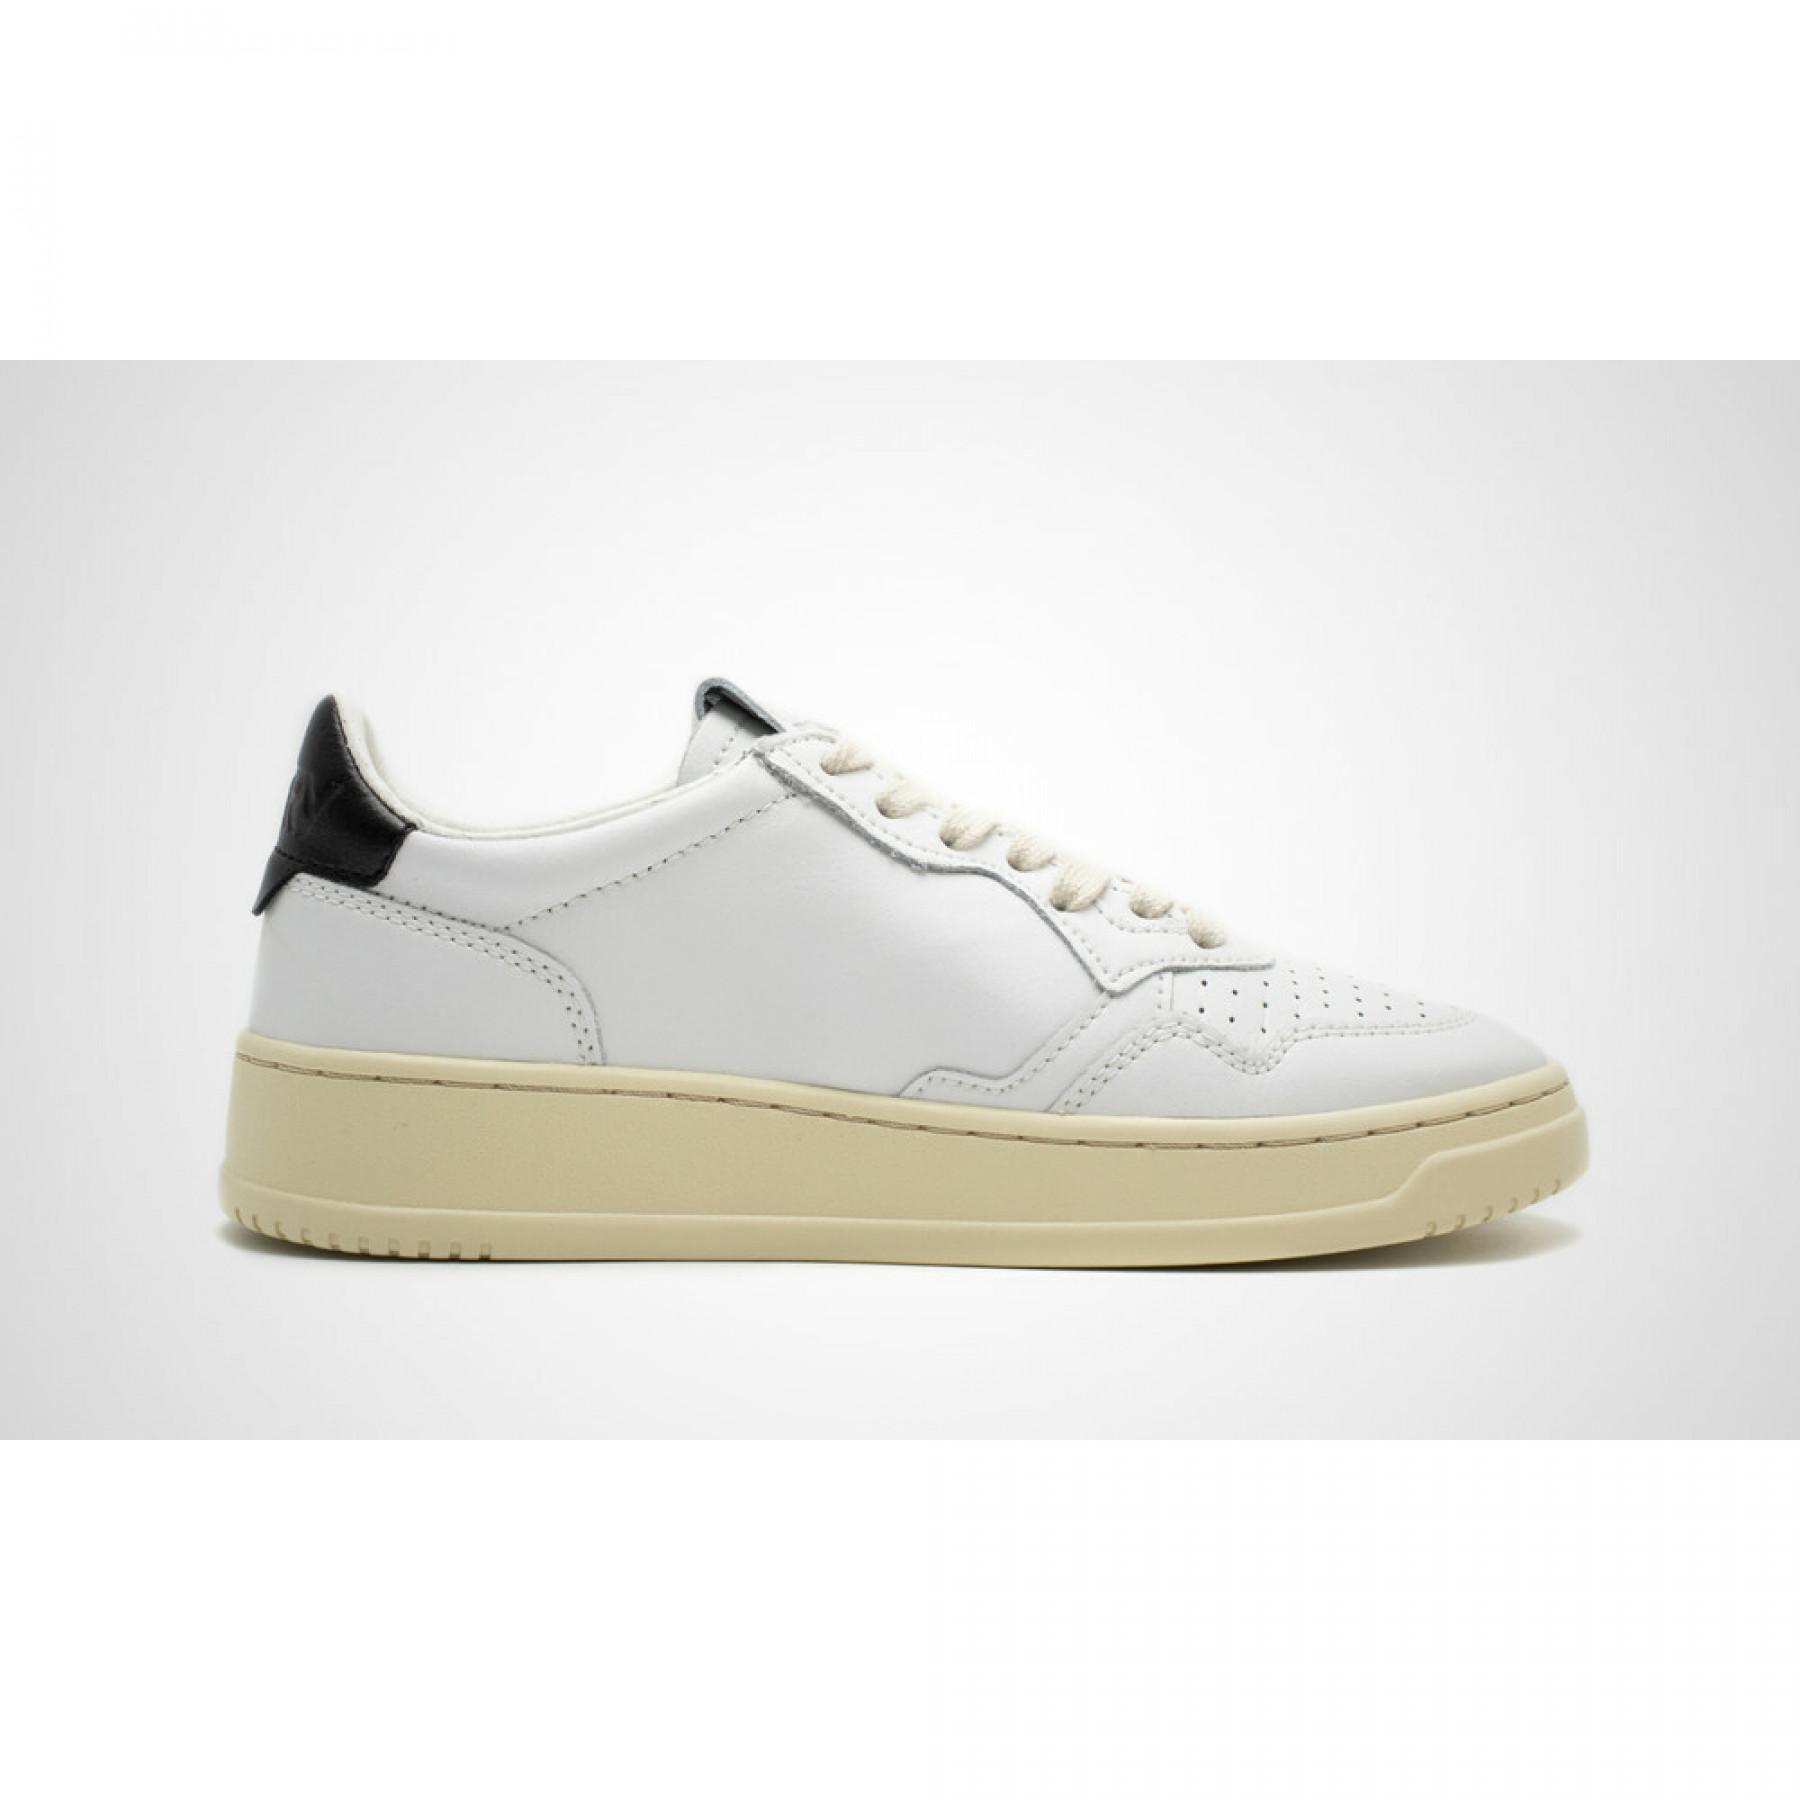 Baskets femme Autry Medalist LL22 Leather White/Black